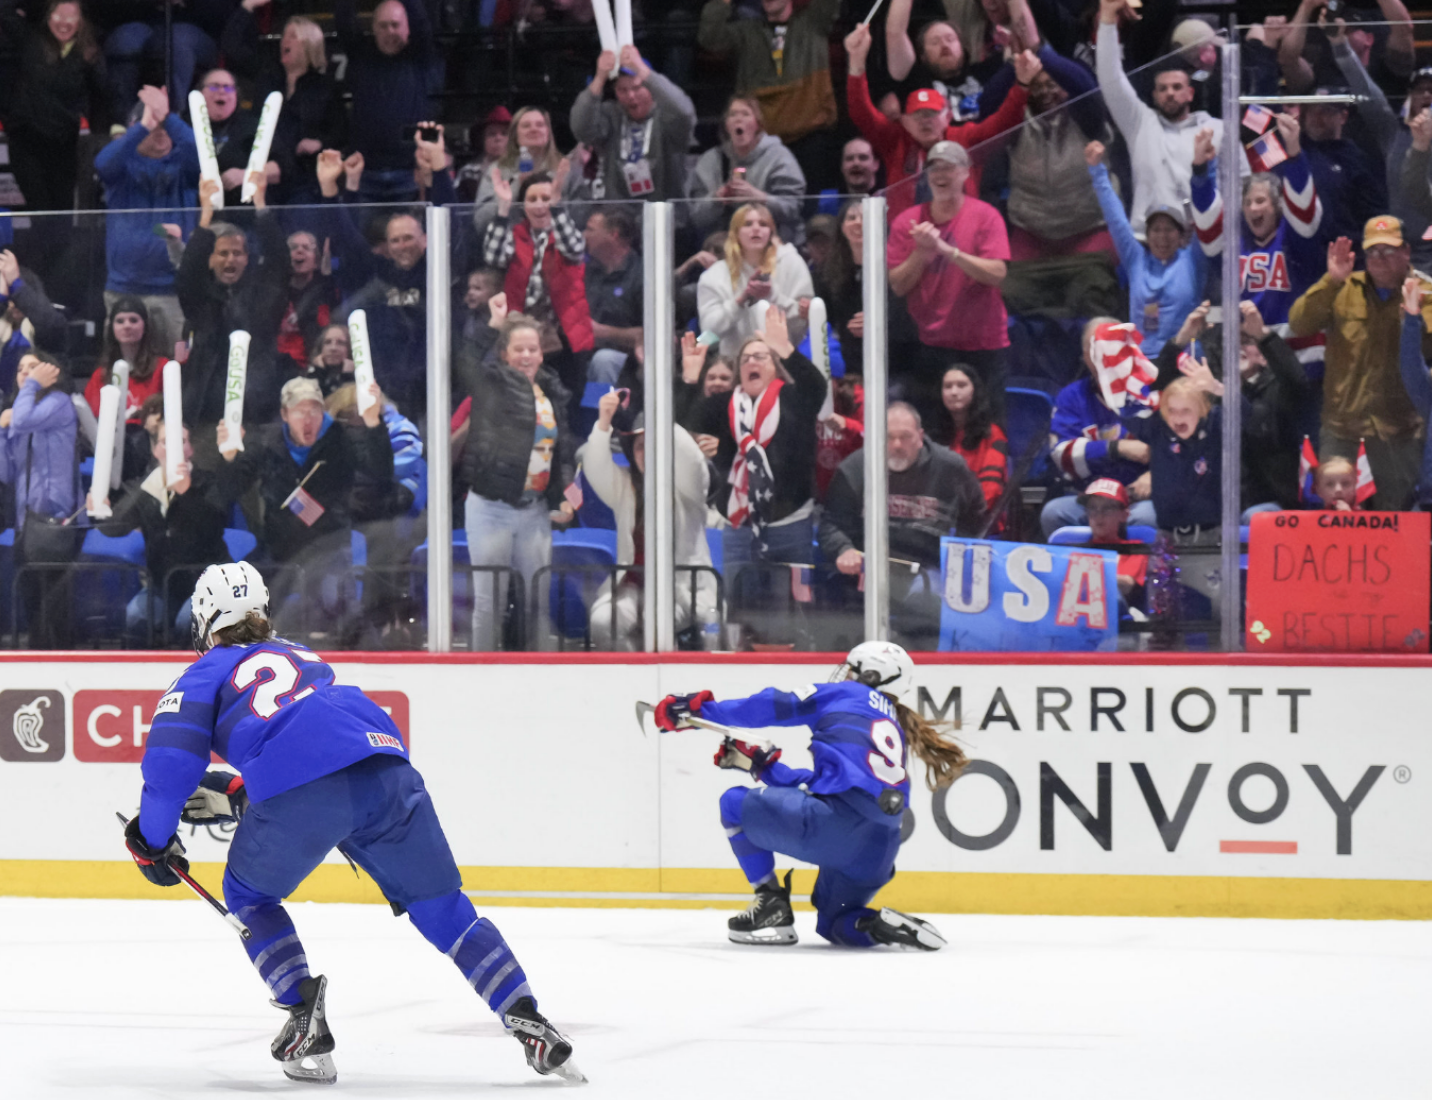 Simms celebrates fist pumps from one knee after scoring the overtime winner against Canada, while Taylor Heise skates to join her. They are both wearing blue USA jerseys.